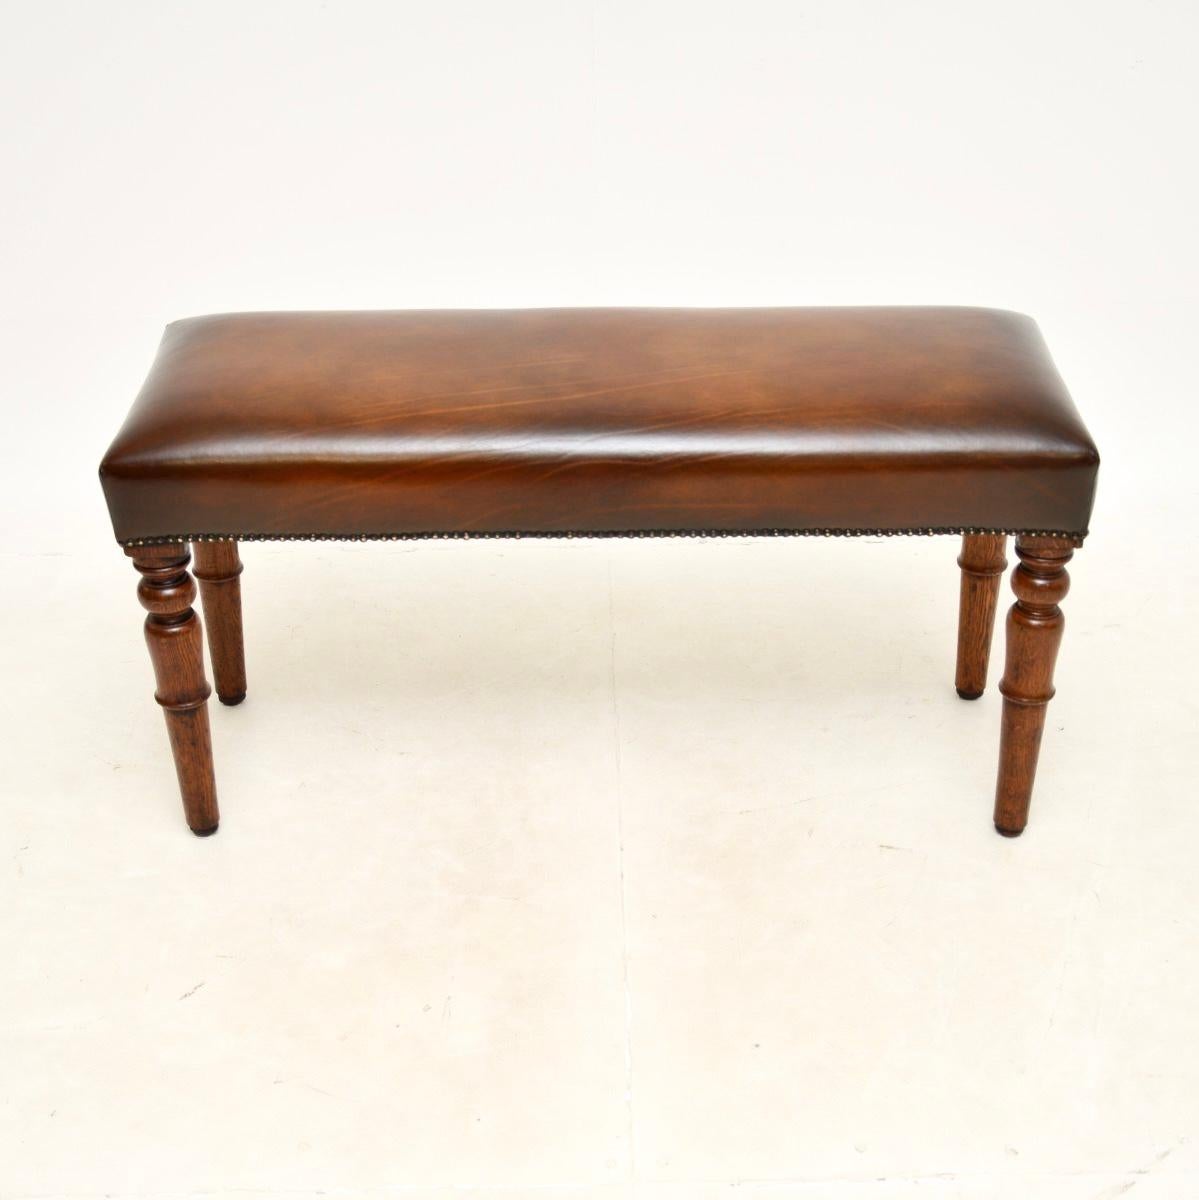 A fantastic antique Victorian leather and oak stool / bench. This was made in England, it dates from around the 1860-1880 period.

The quality is outstanding, it stands on beautifully turned solid oak legs. This is a great size for various settings